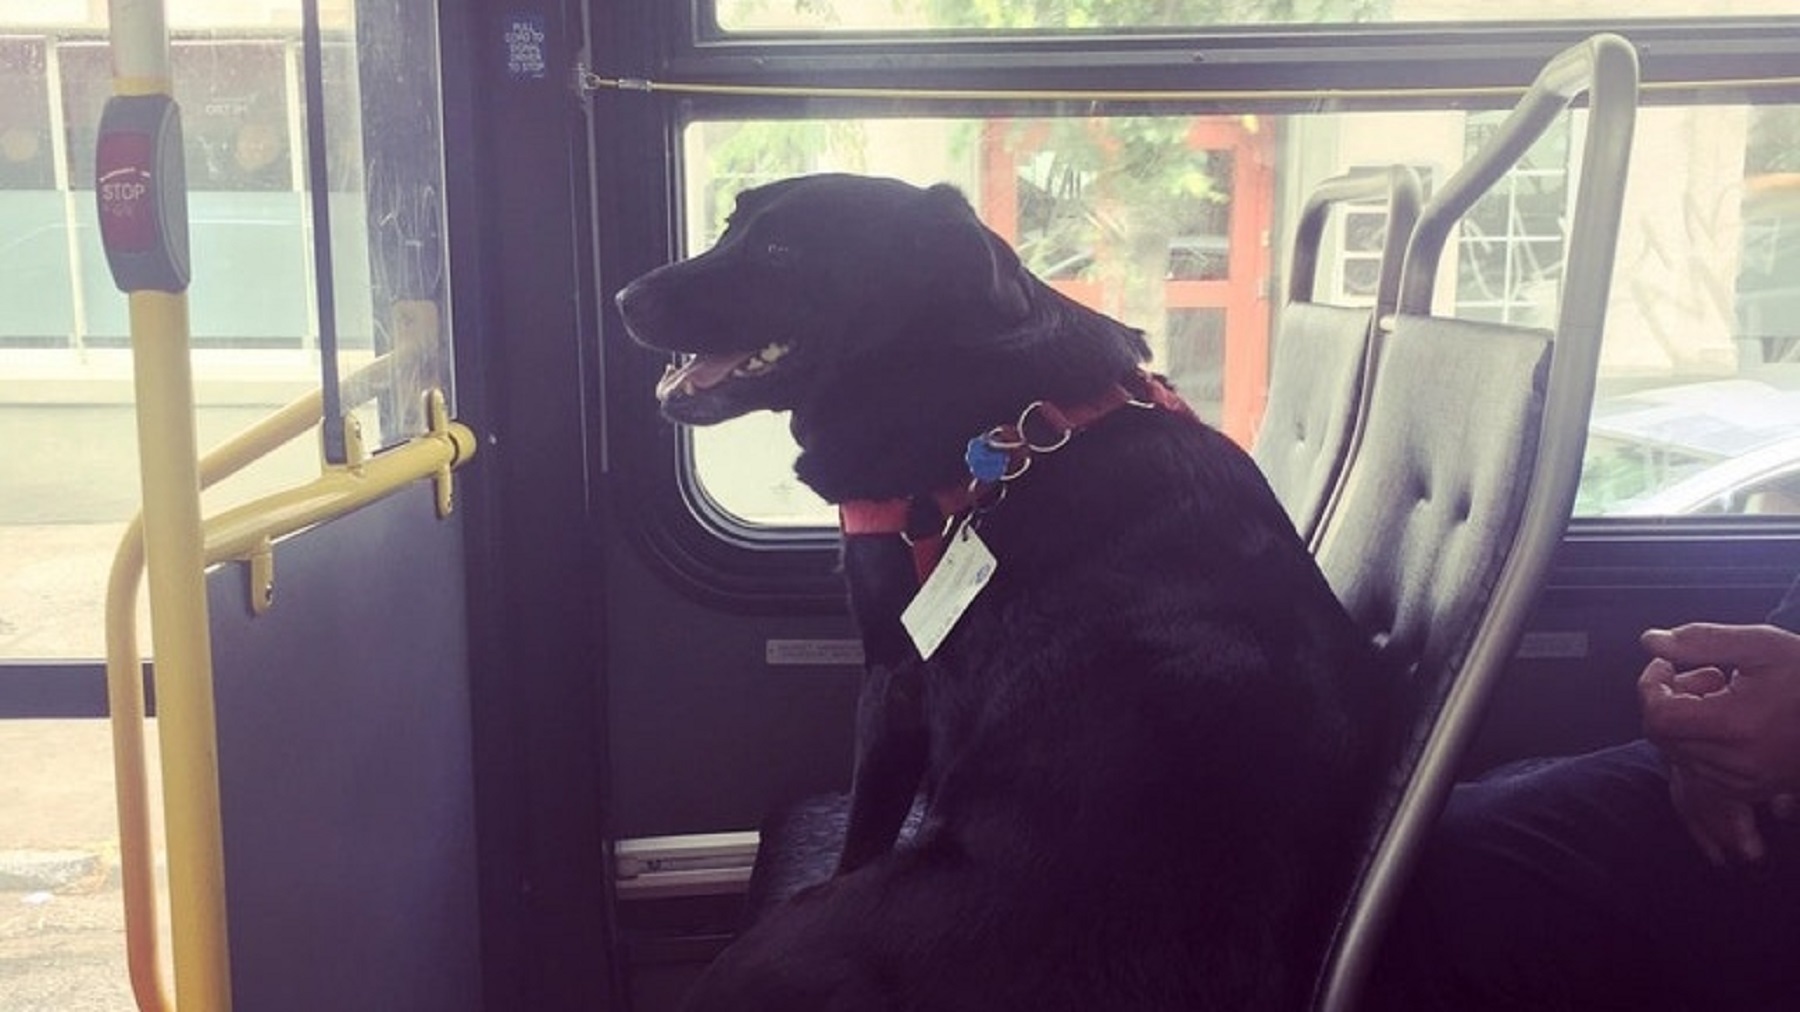 Eclipse the dog sits on a bus